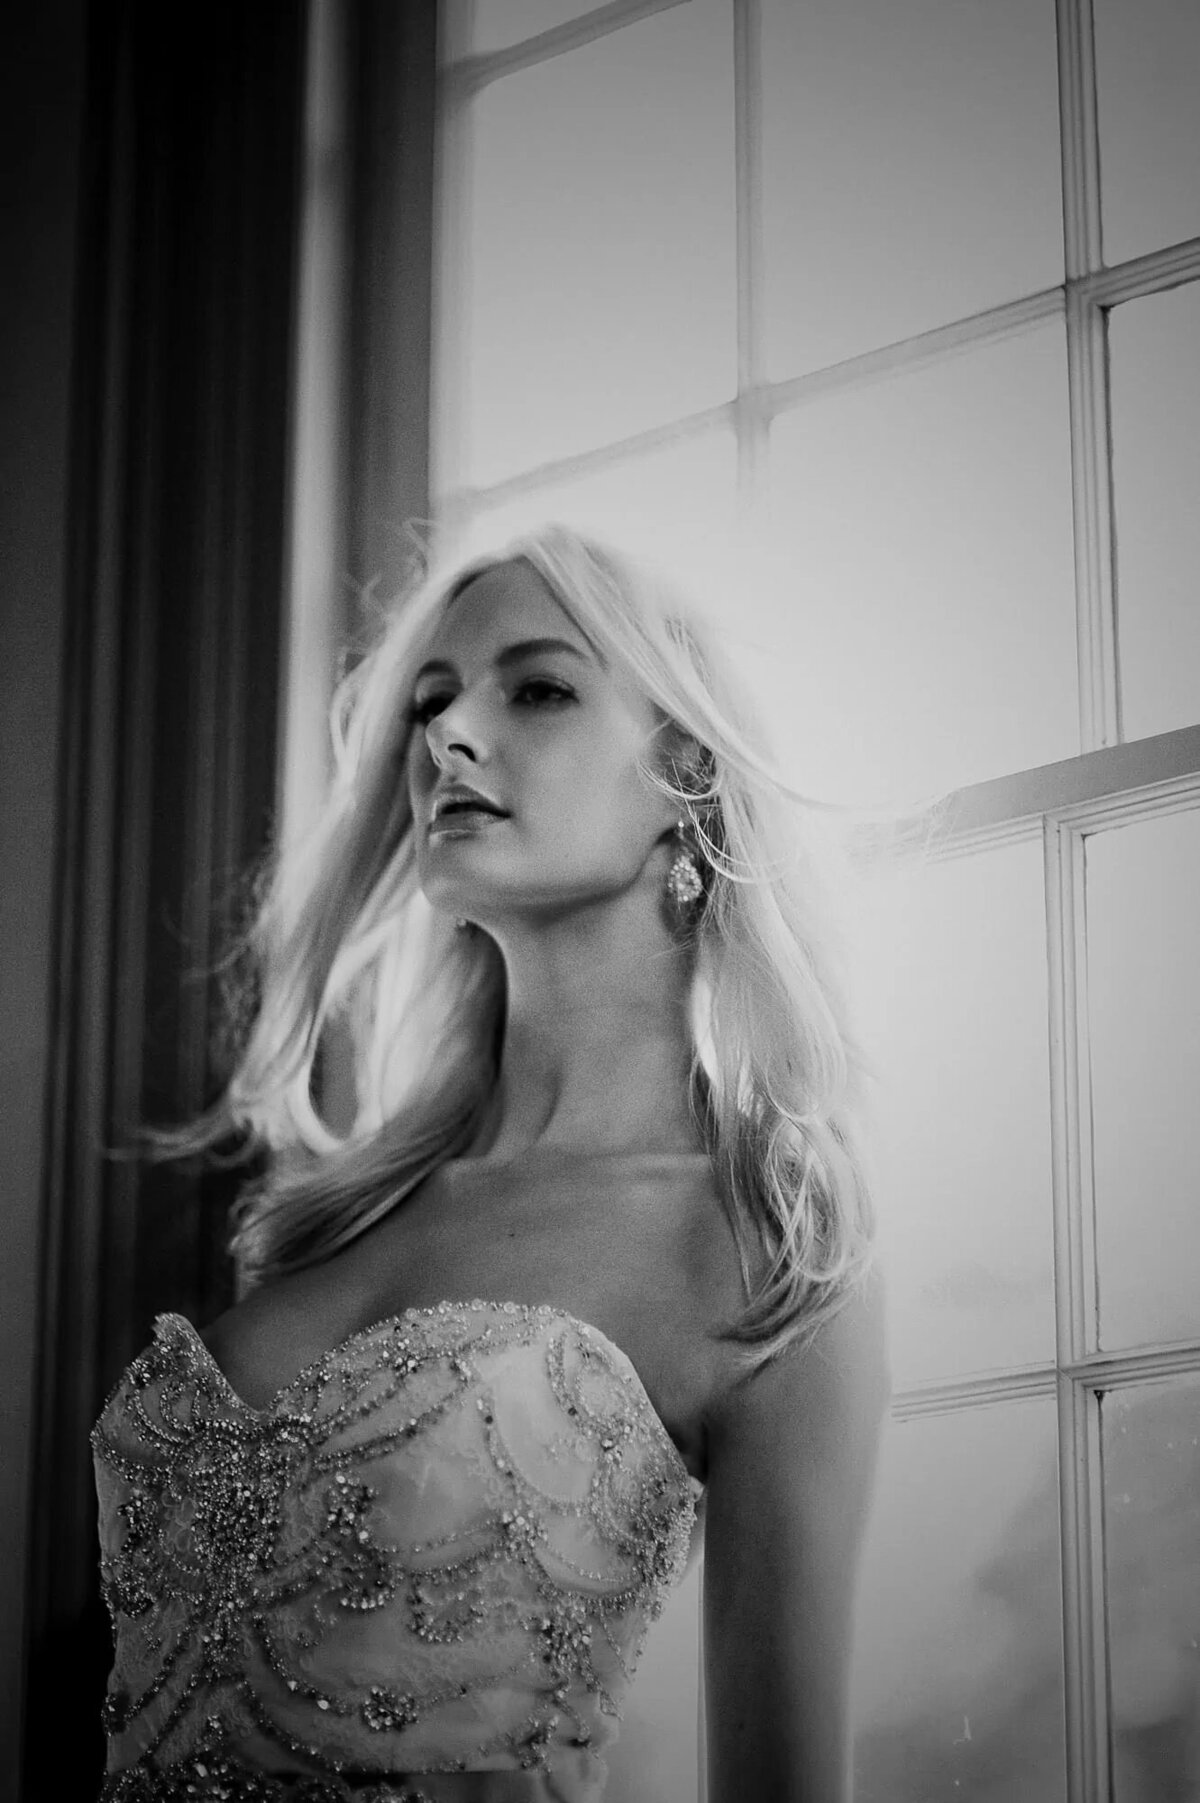 A black and white portrait of a woman in a beaded gown looking contemplatively out a window